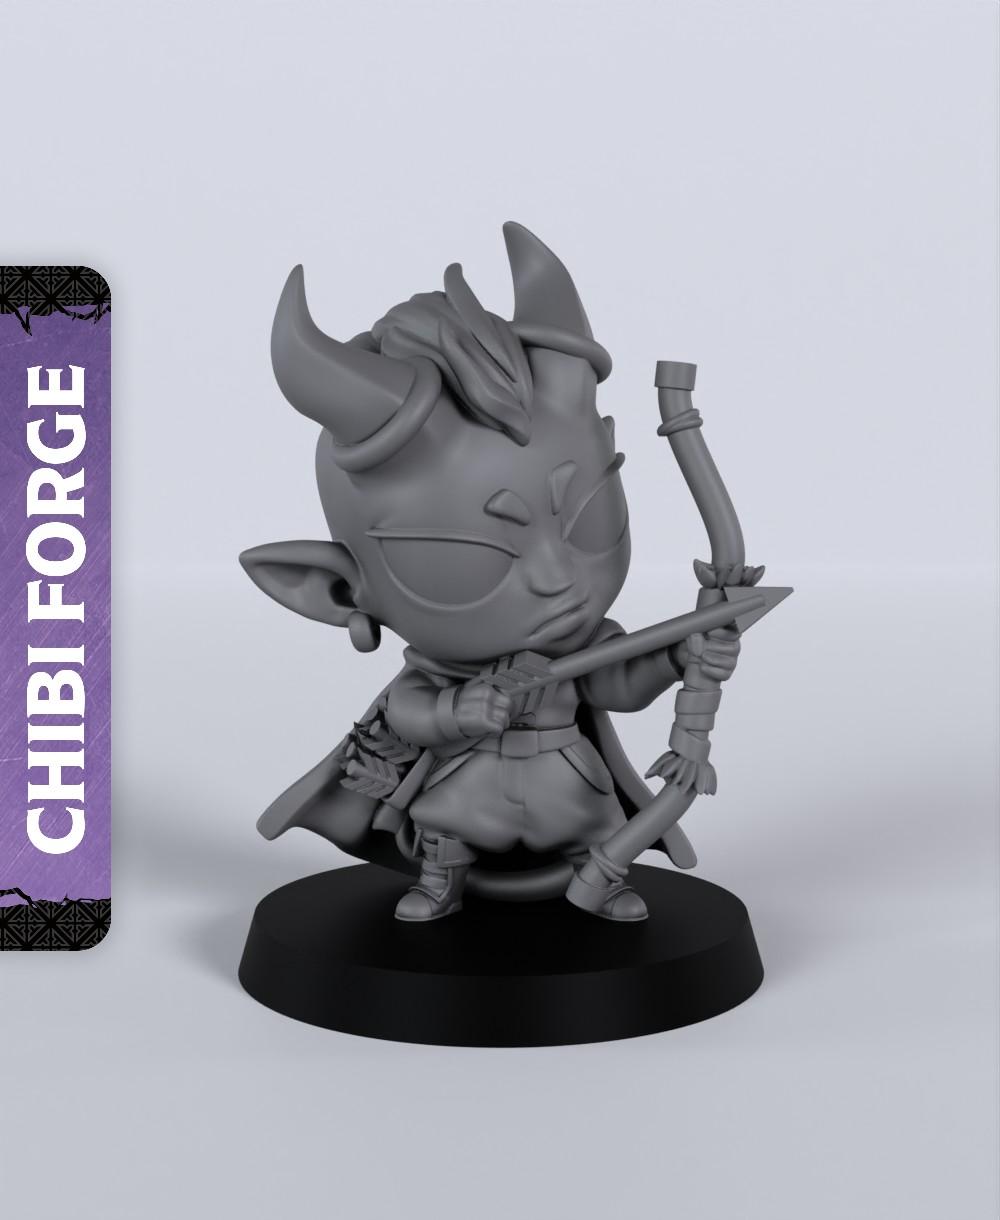 Male Tiefling Ranger - With Free Dragon Warhammer - 5e DnD Inspired for RPG and Wargamers 3d model